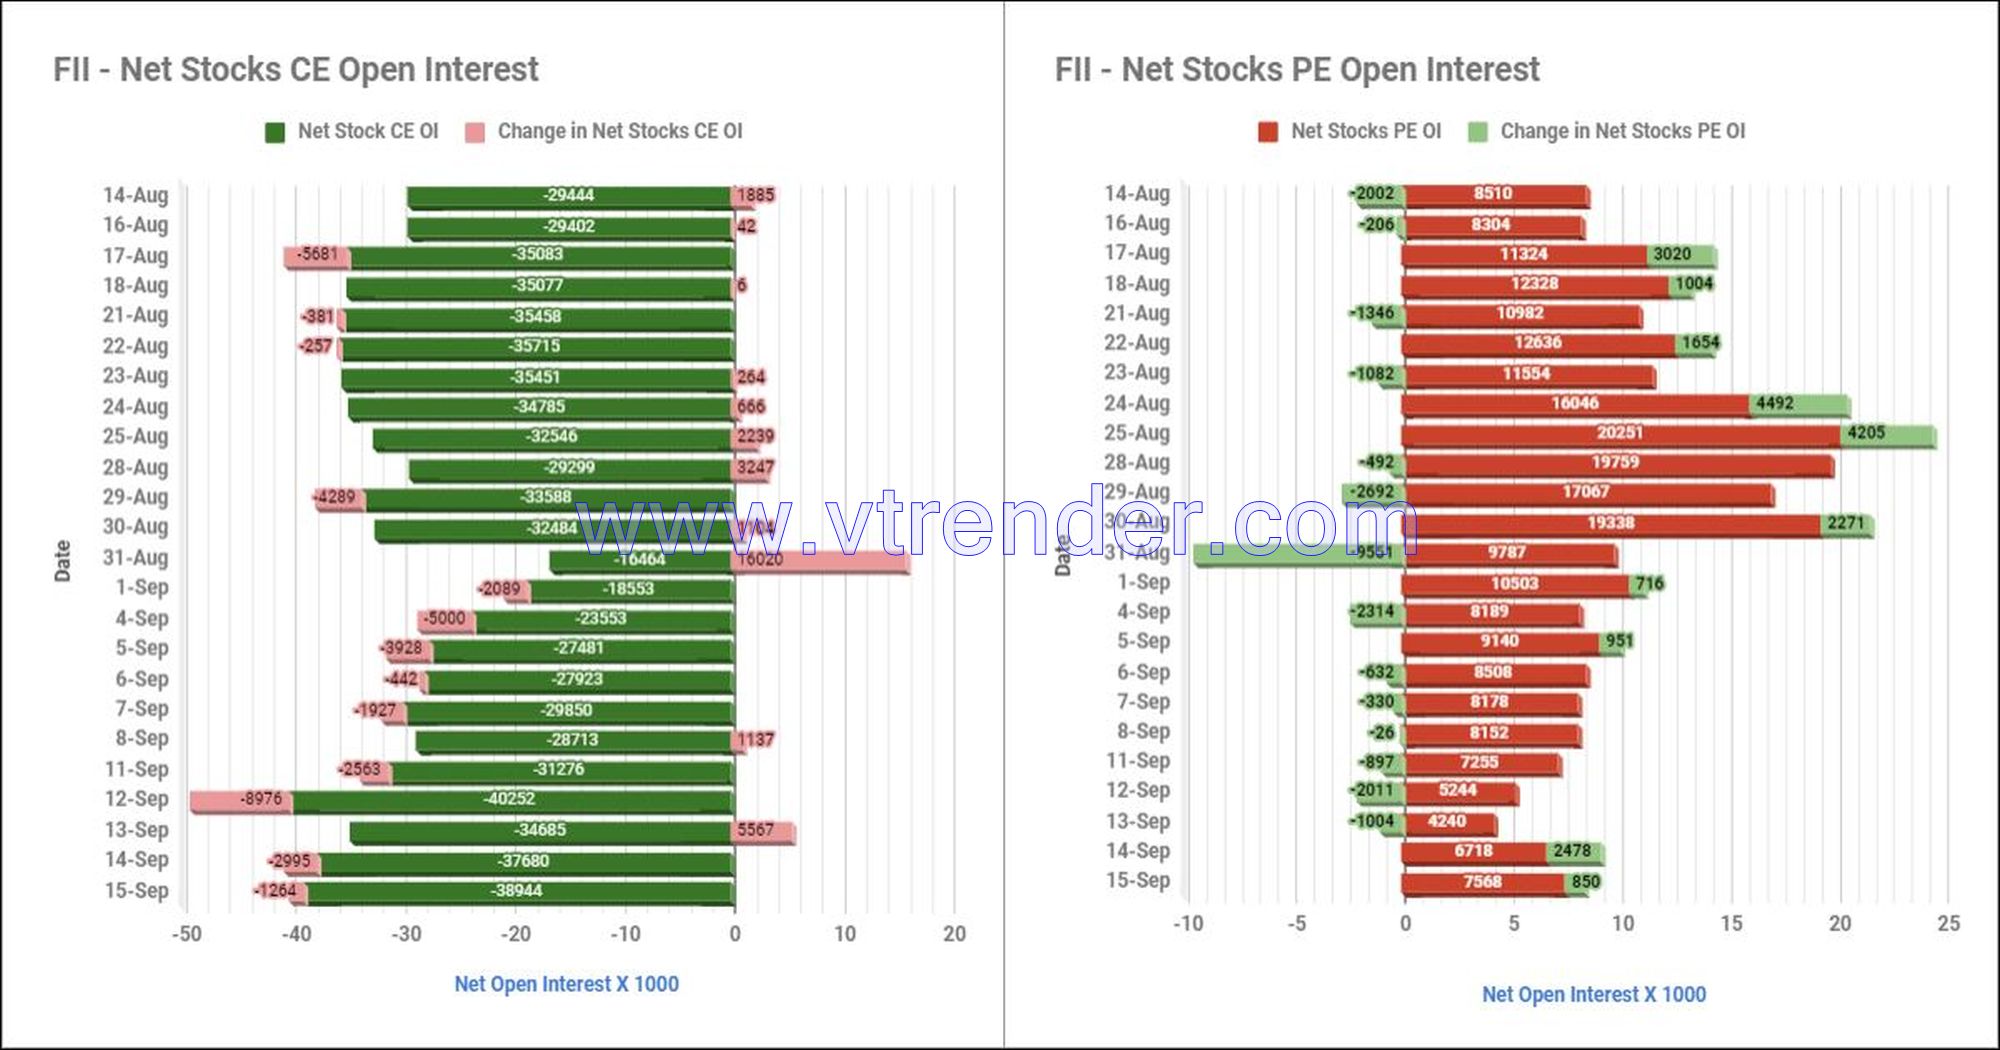 Fiistop15Sep Participantwise Net Open Interest And Net Equity Investments – 15Th Sep 2023 Ce, Client, Dii, Fii, Index Futures, Index Options, Open Interest, Pe, Prop, Stocks Futures